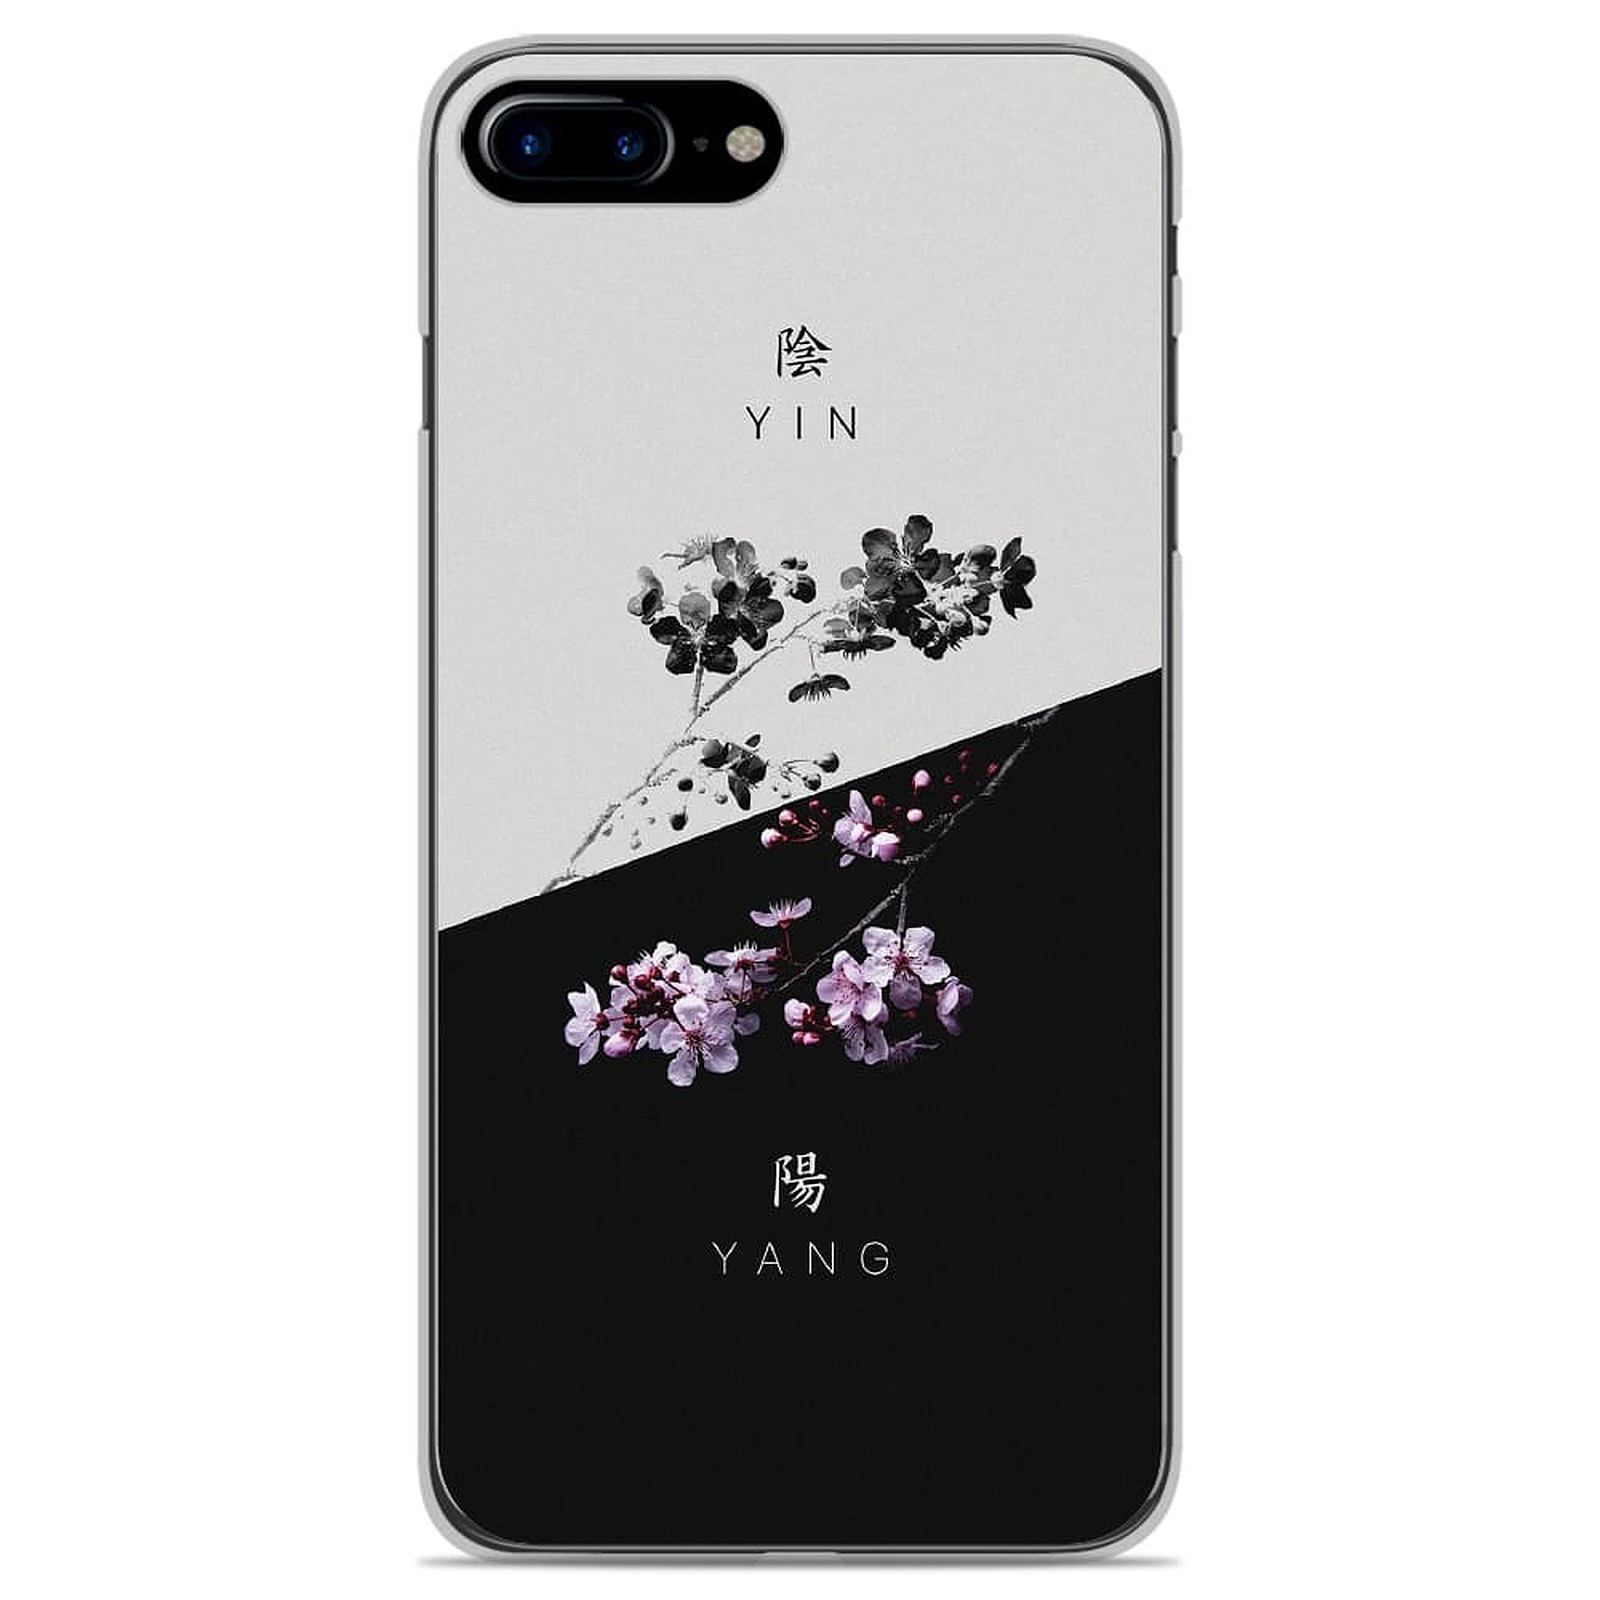 1001 Coques Coque silicone gel Apple iPhone 7 Plus motif Yin et Yang - Coque telephone 1001Coques